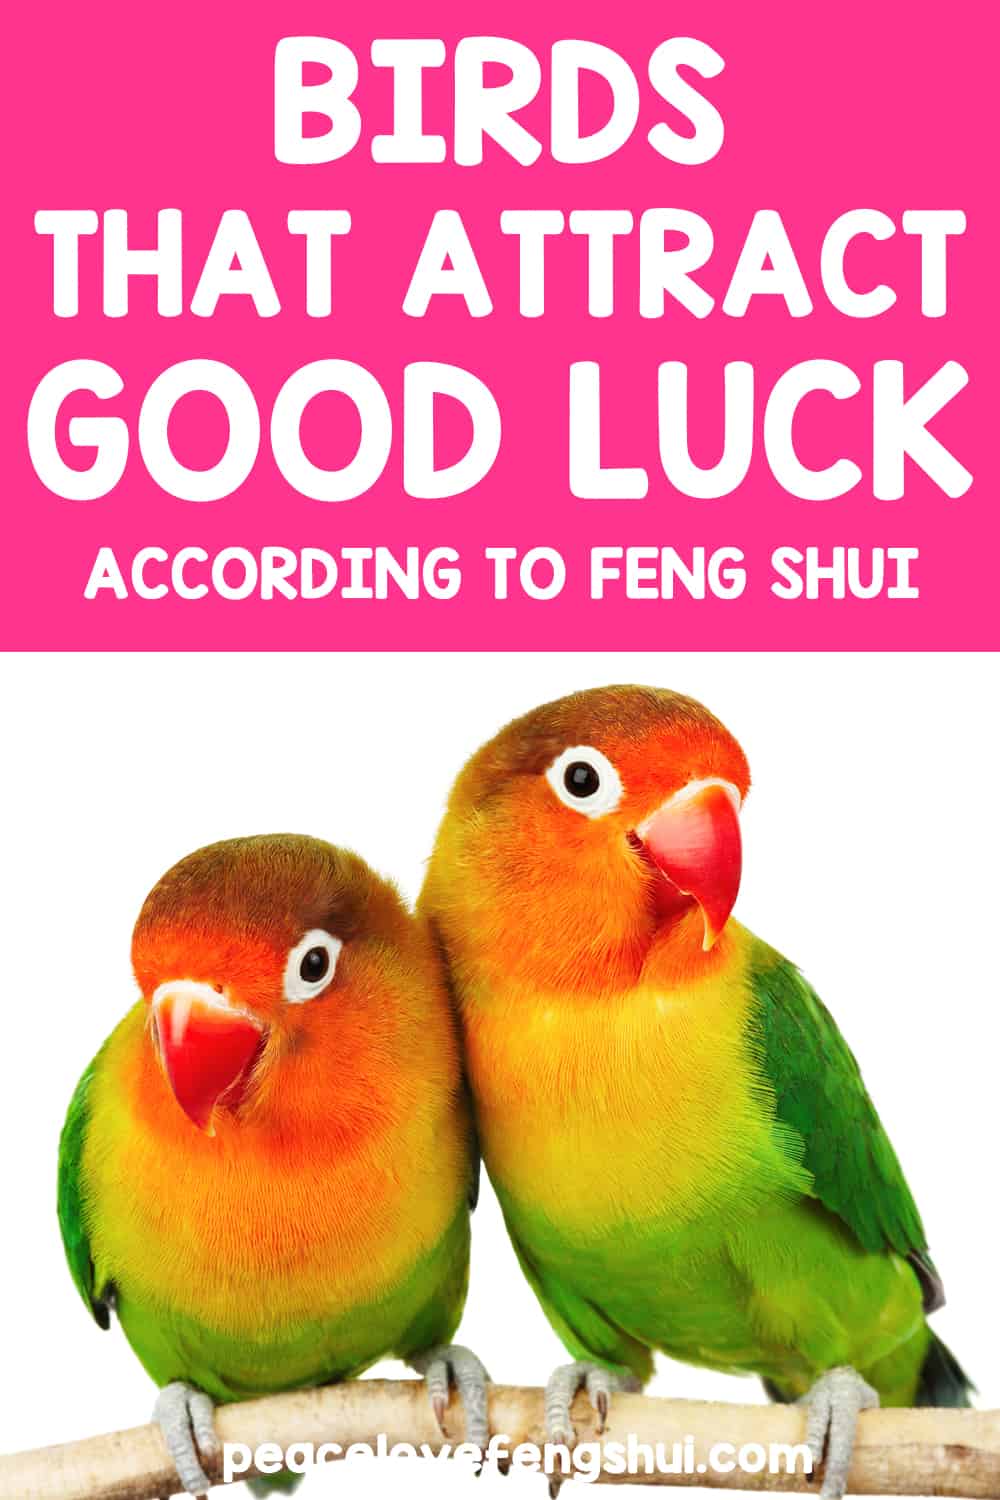 birds that attract good luck according to feng shui